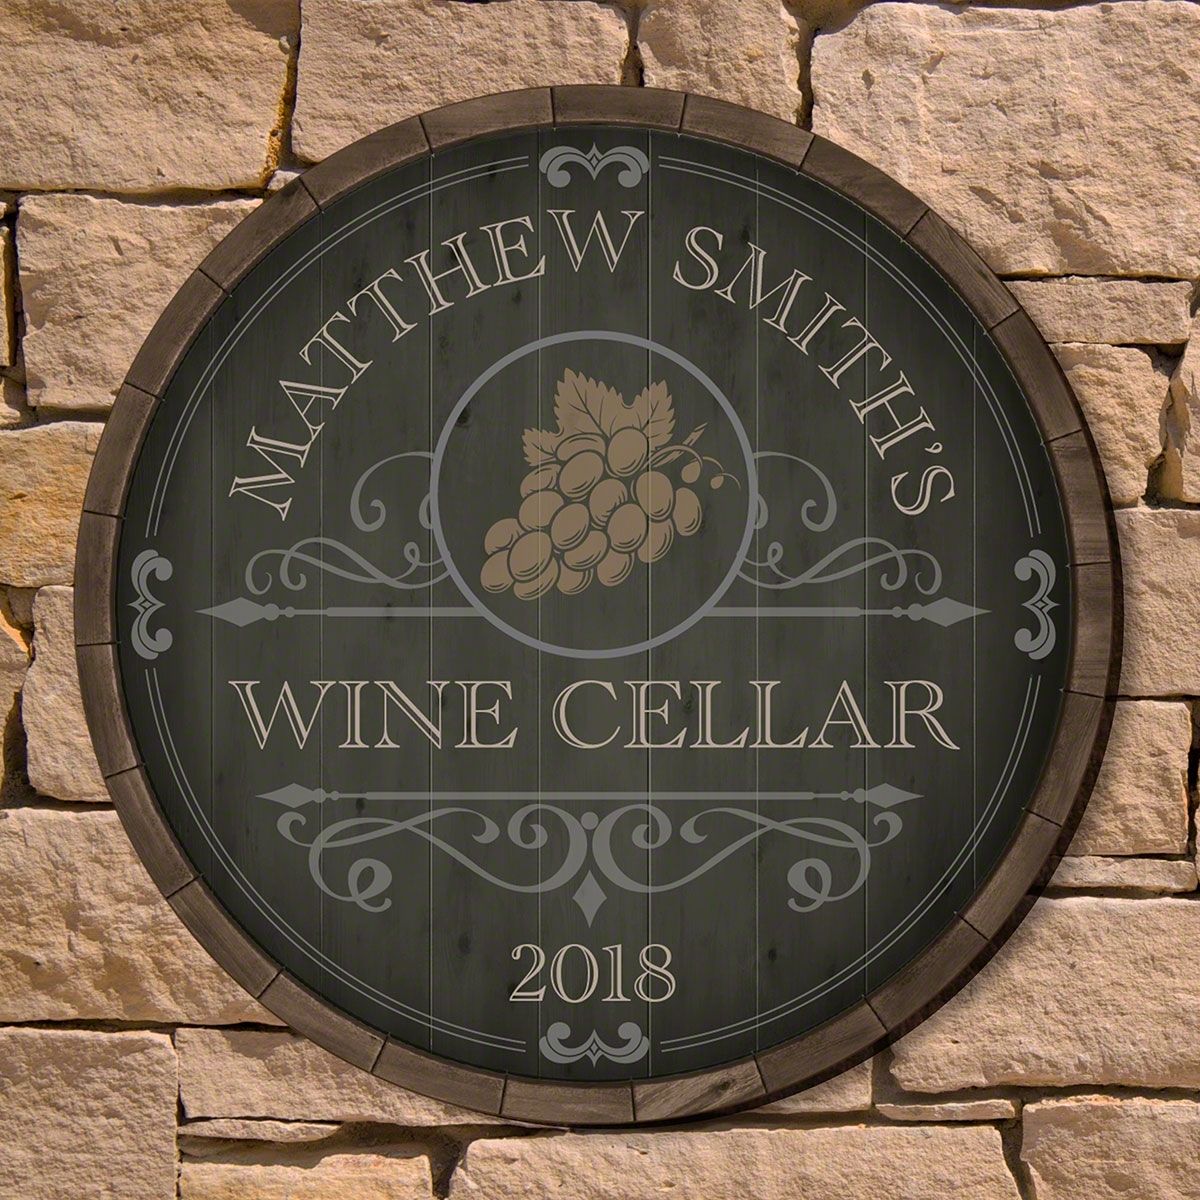 The Best Gifts for Wine Lovers Option: Beauteous Barrel Personalized Wine Cellar Sign